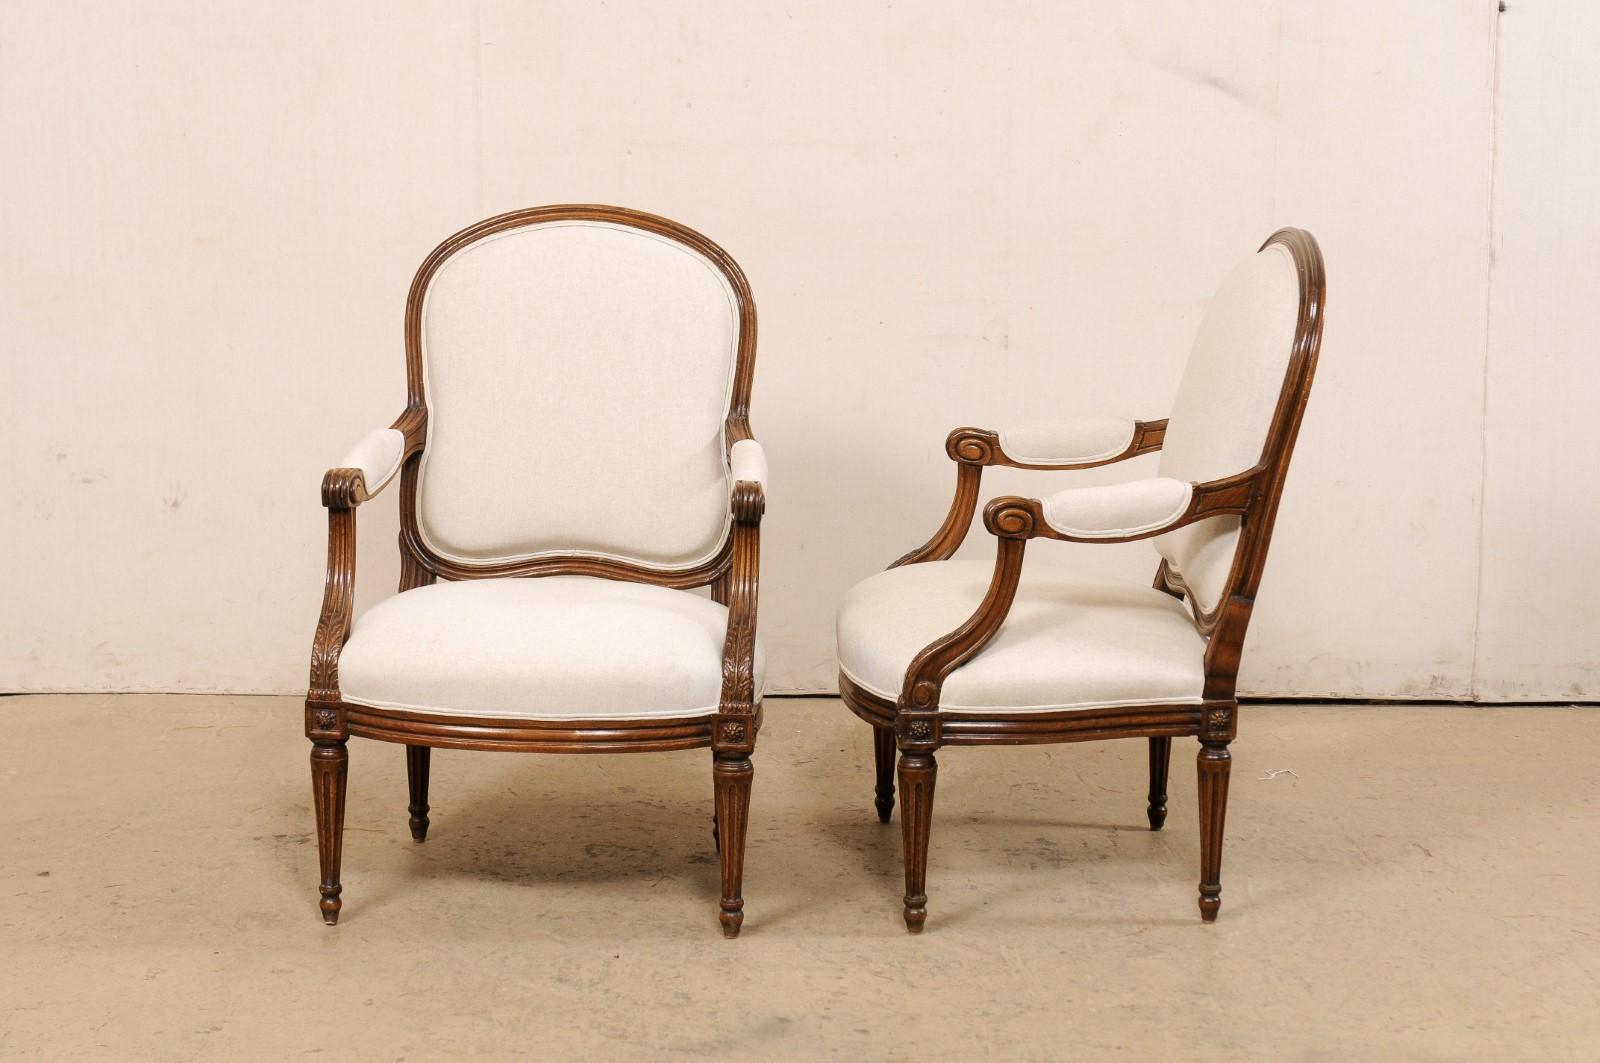 19th C. French Pair Carved-Wood Fauteuil Armchairs, Newly Upholstered in Linen For Sale 5